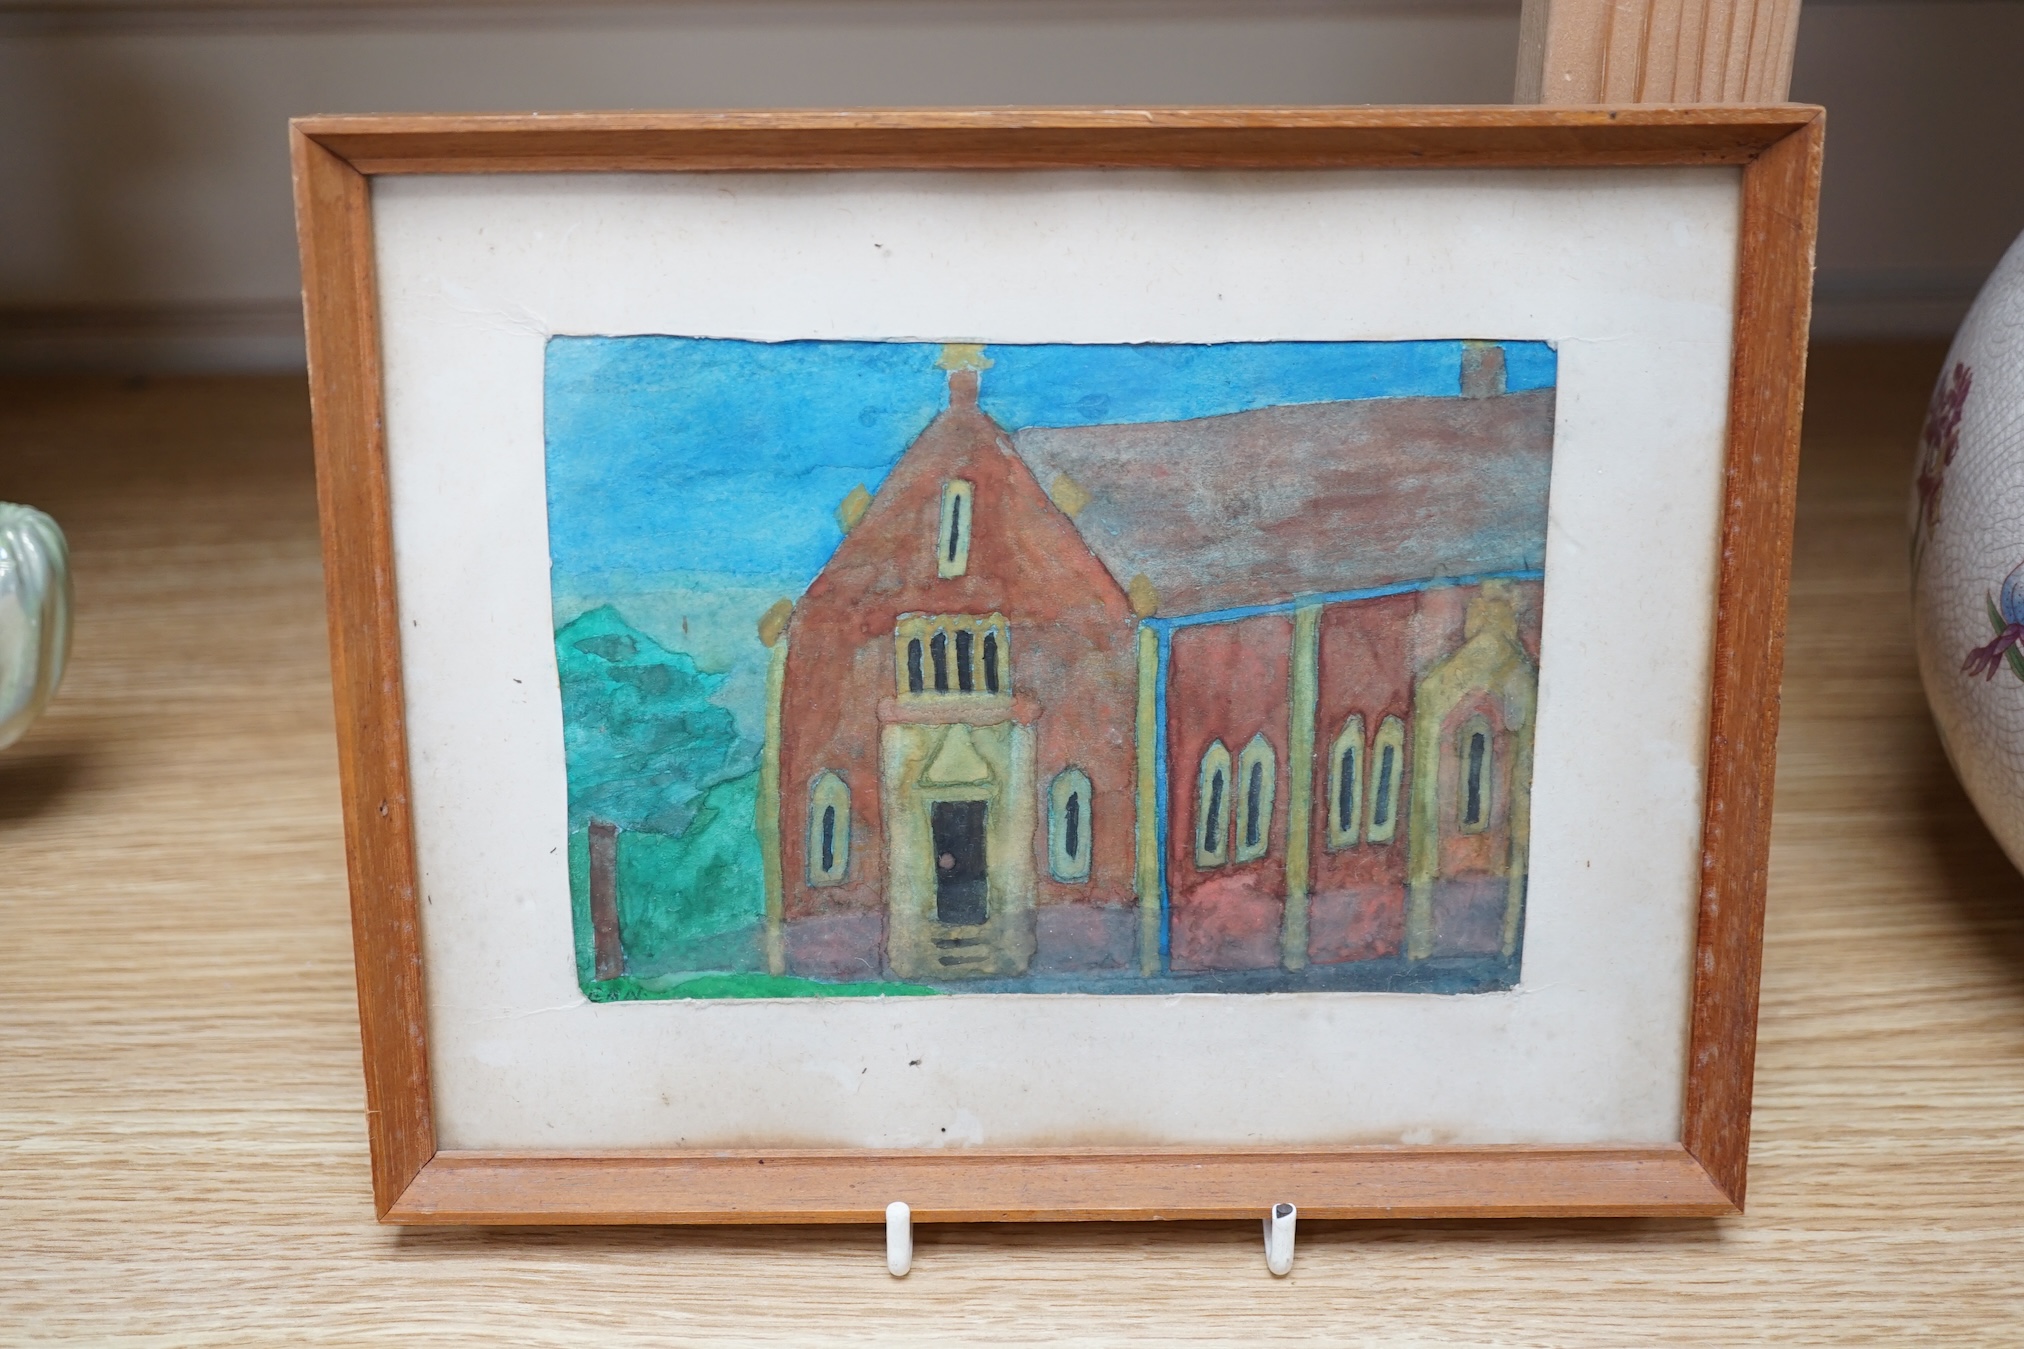 From the Studio of Fred Cuming. Miss Newson, watercolour, ‘Broxbourne Parish Room’, 11 x 16cm. Condition - fair to good